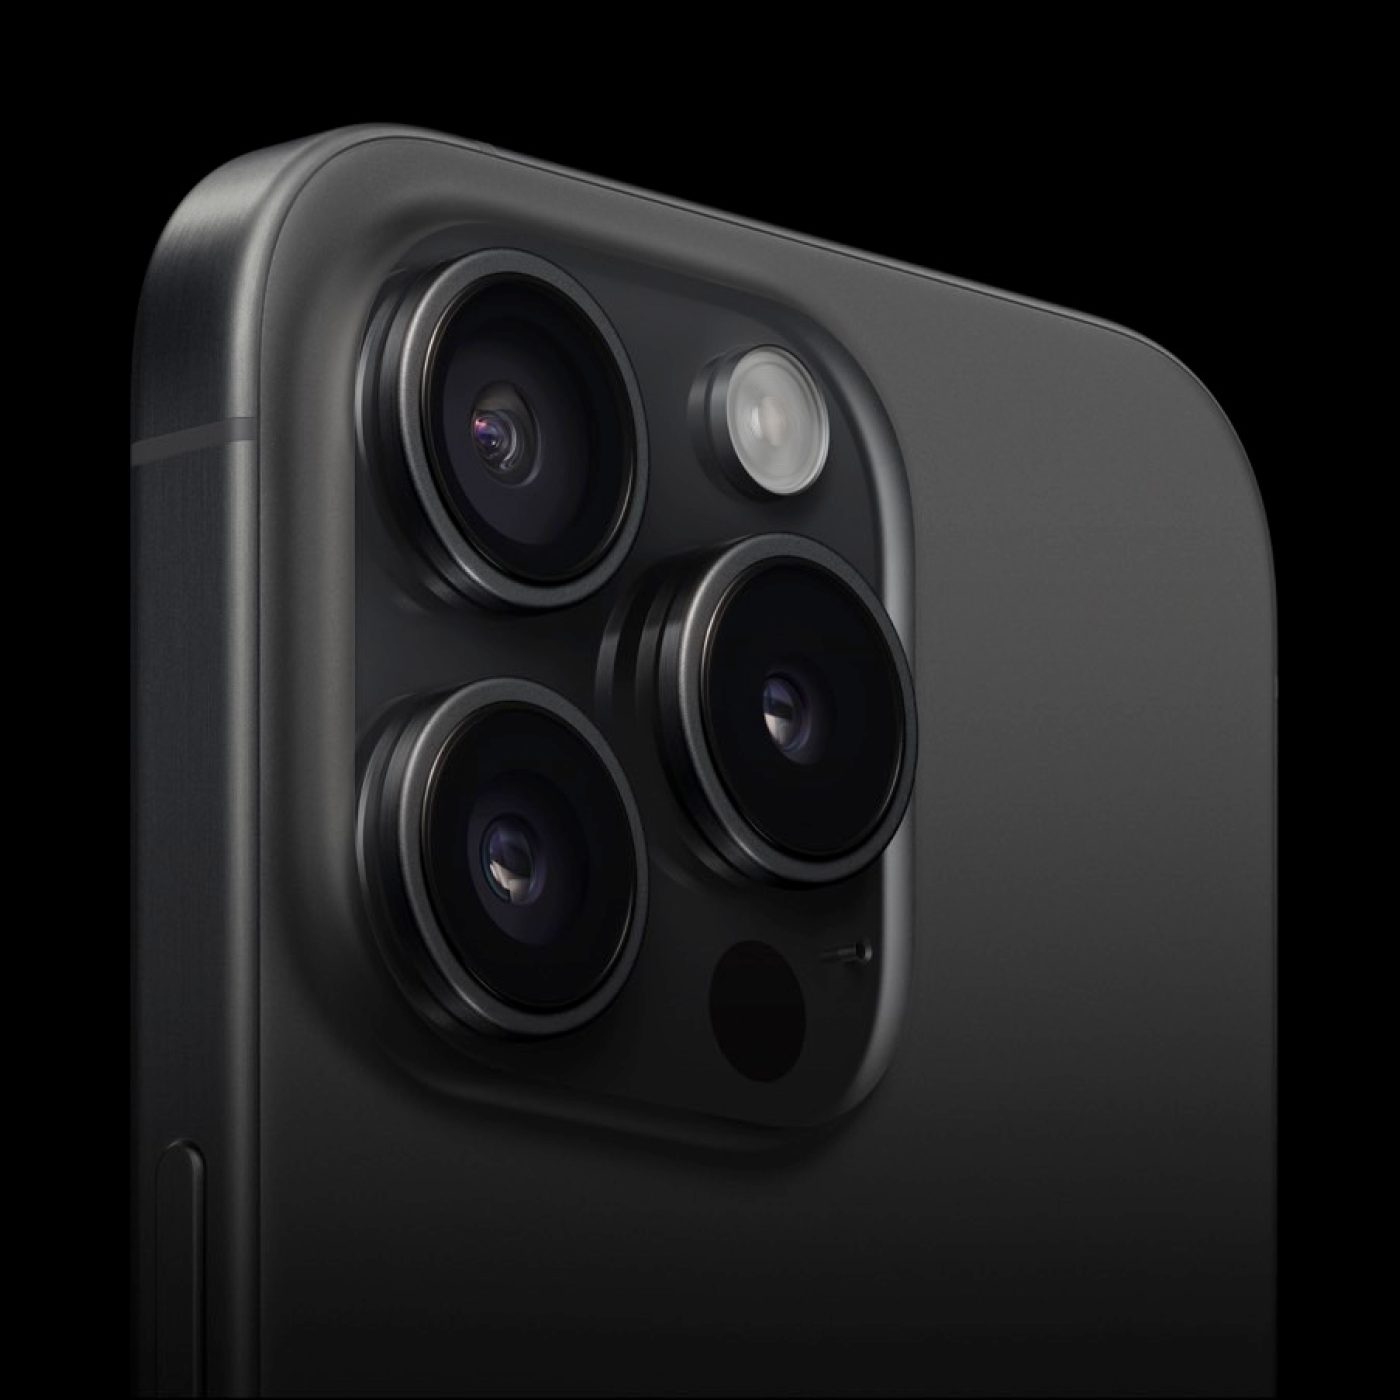 What's new with iPhone 15 Pro Max: Powerful A17 chip, 10x periscope camera